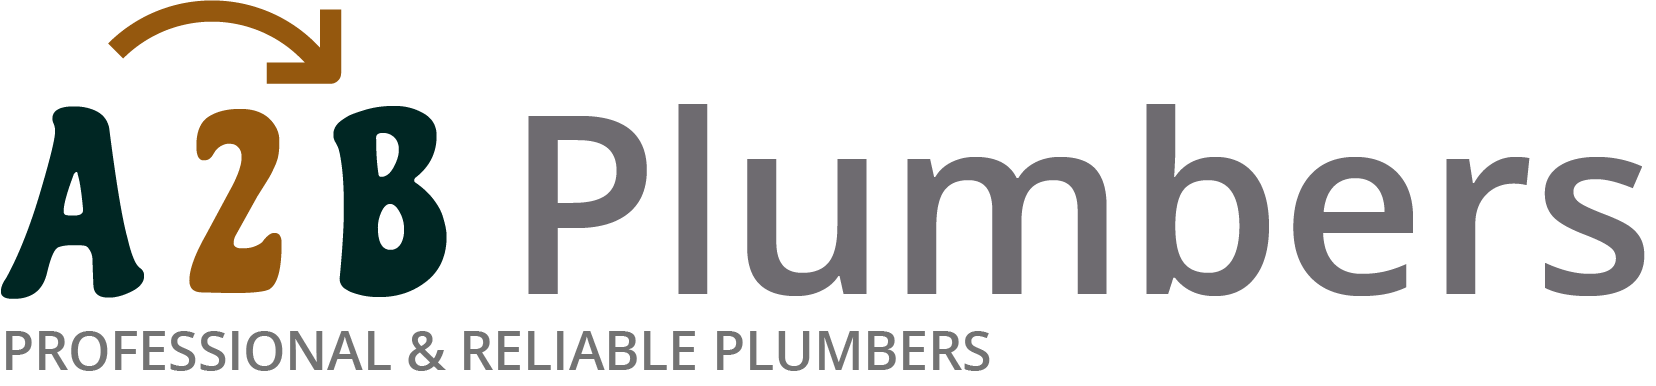 If you need a boiler installed, a radiator repaired or a leaking tap fixed, call us now - we provide services for properties in Ponteland and the local area.